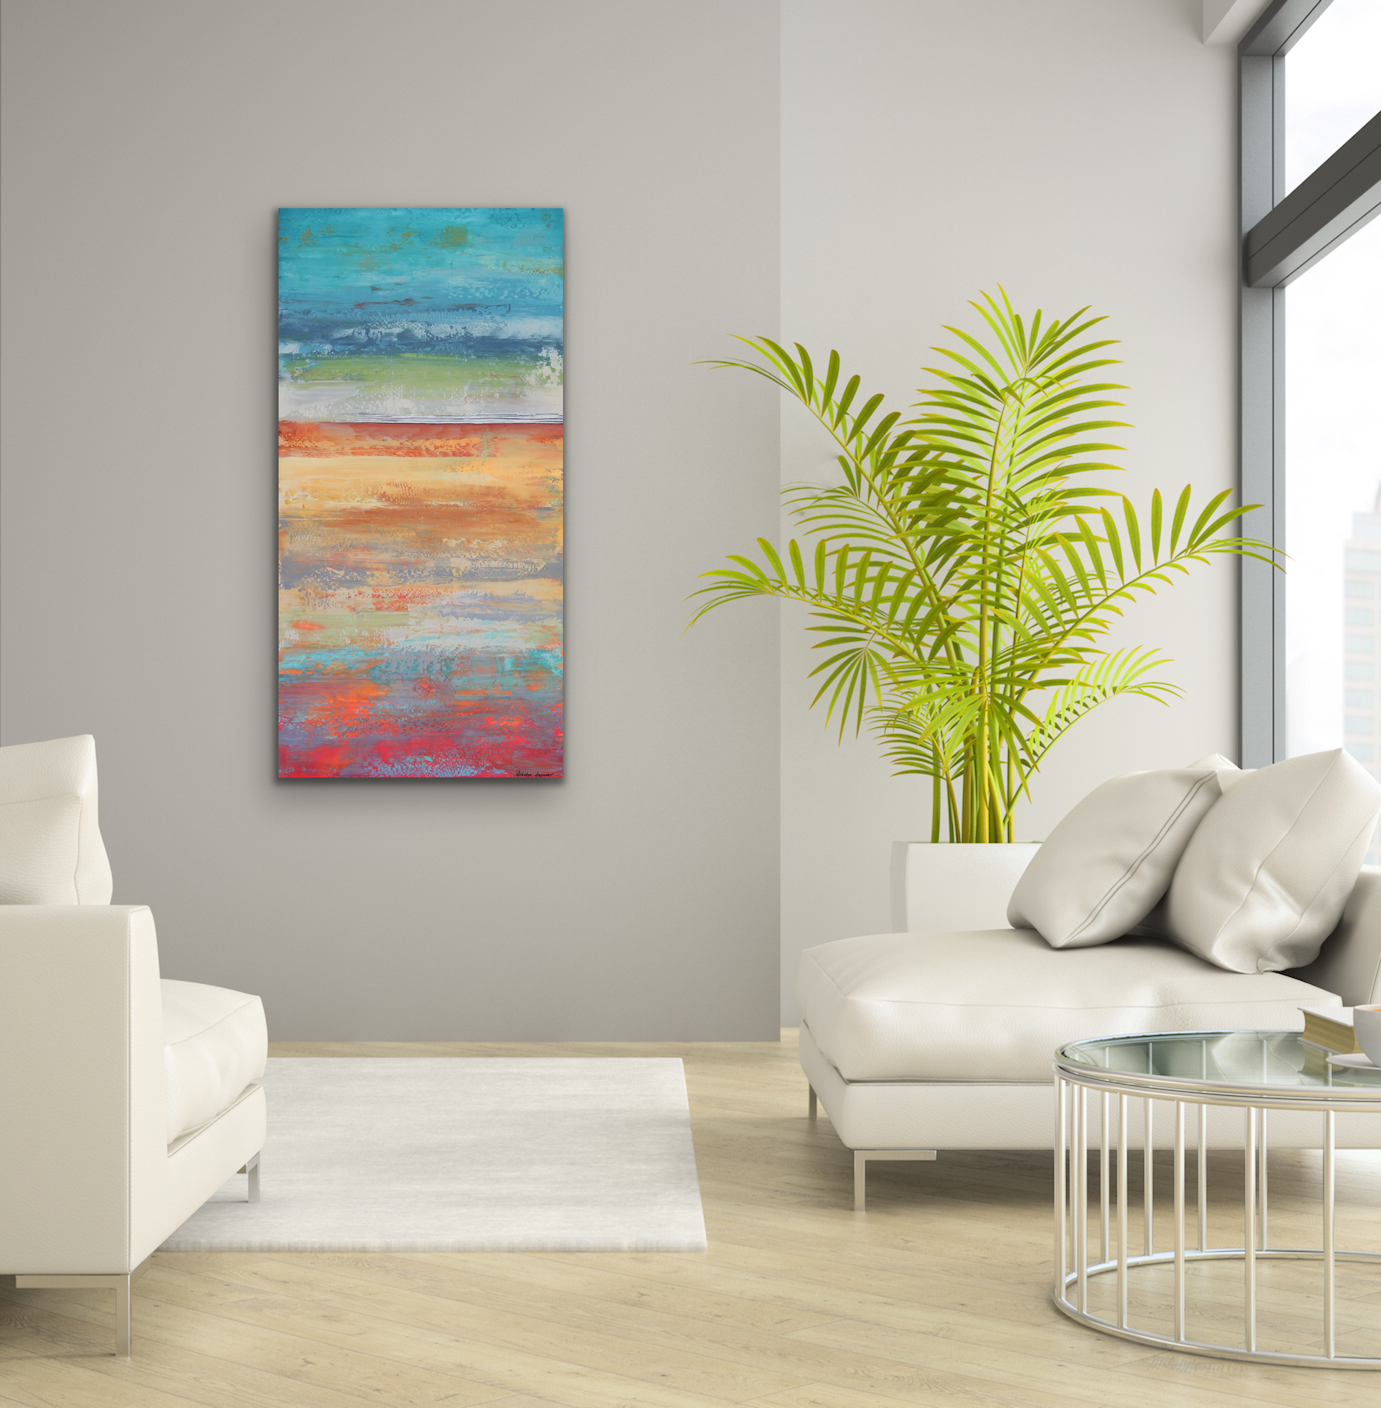 Abstract painting on the wall of a living room